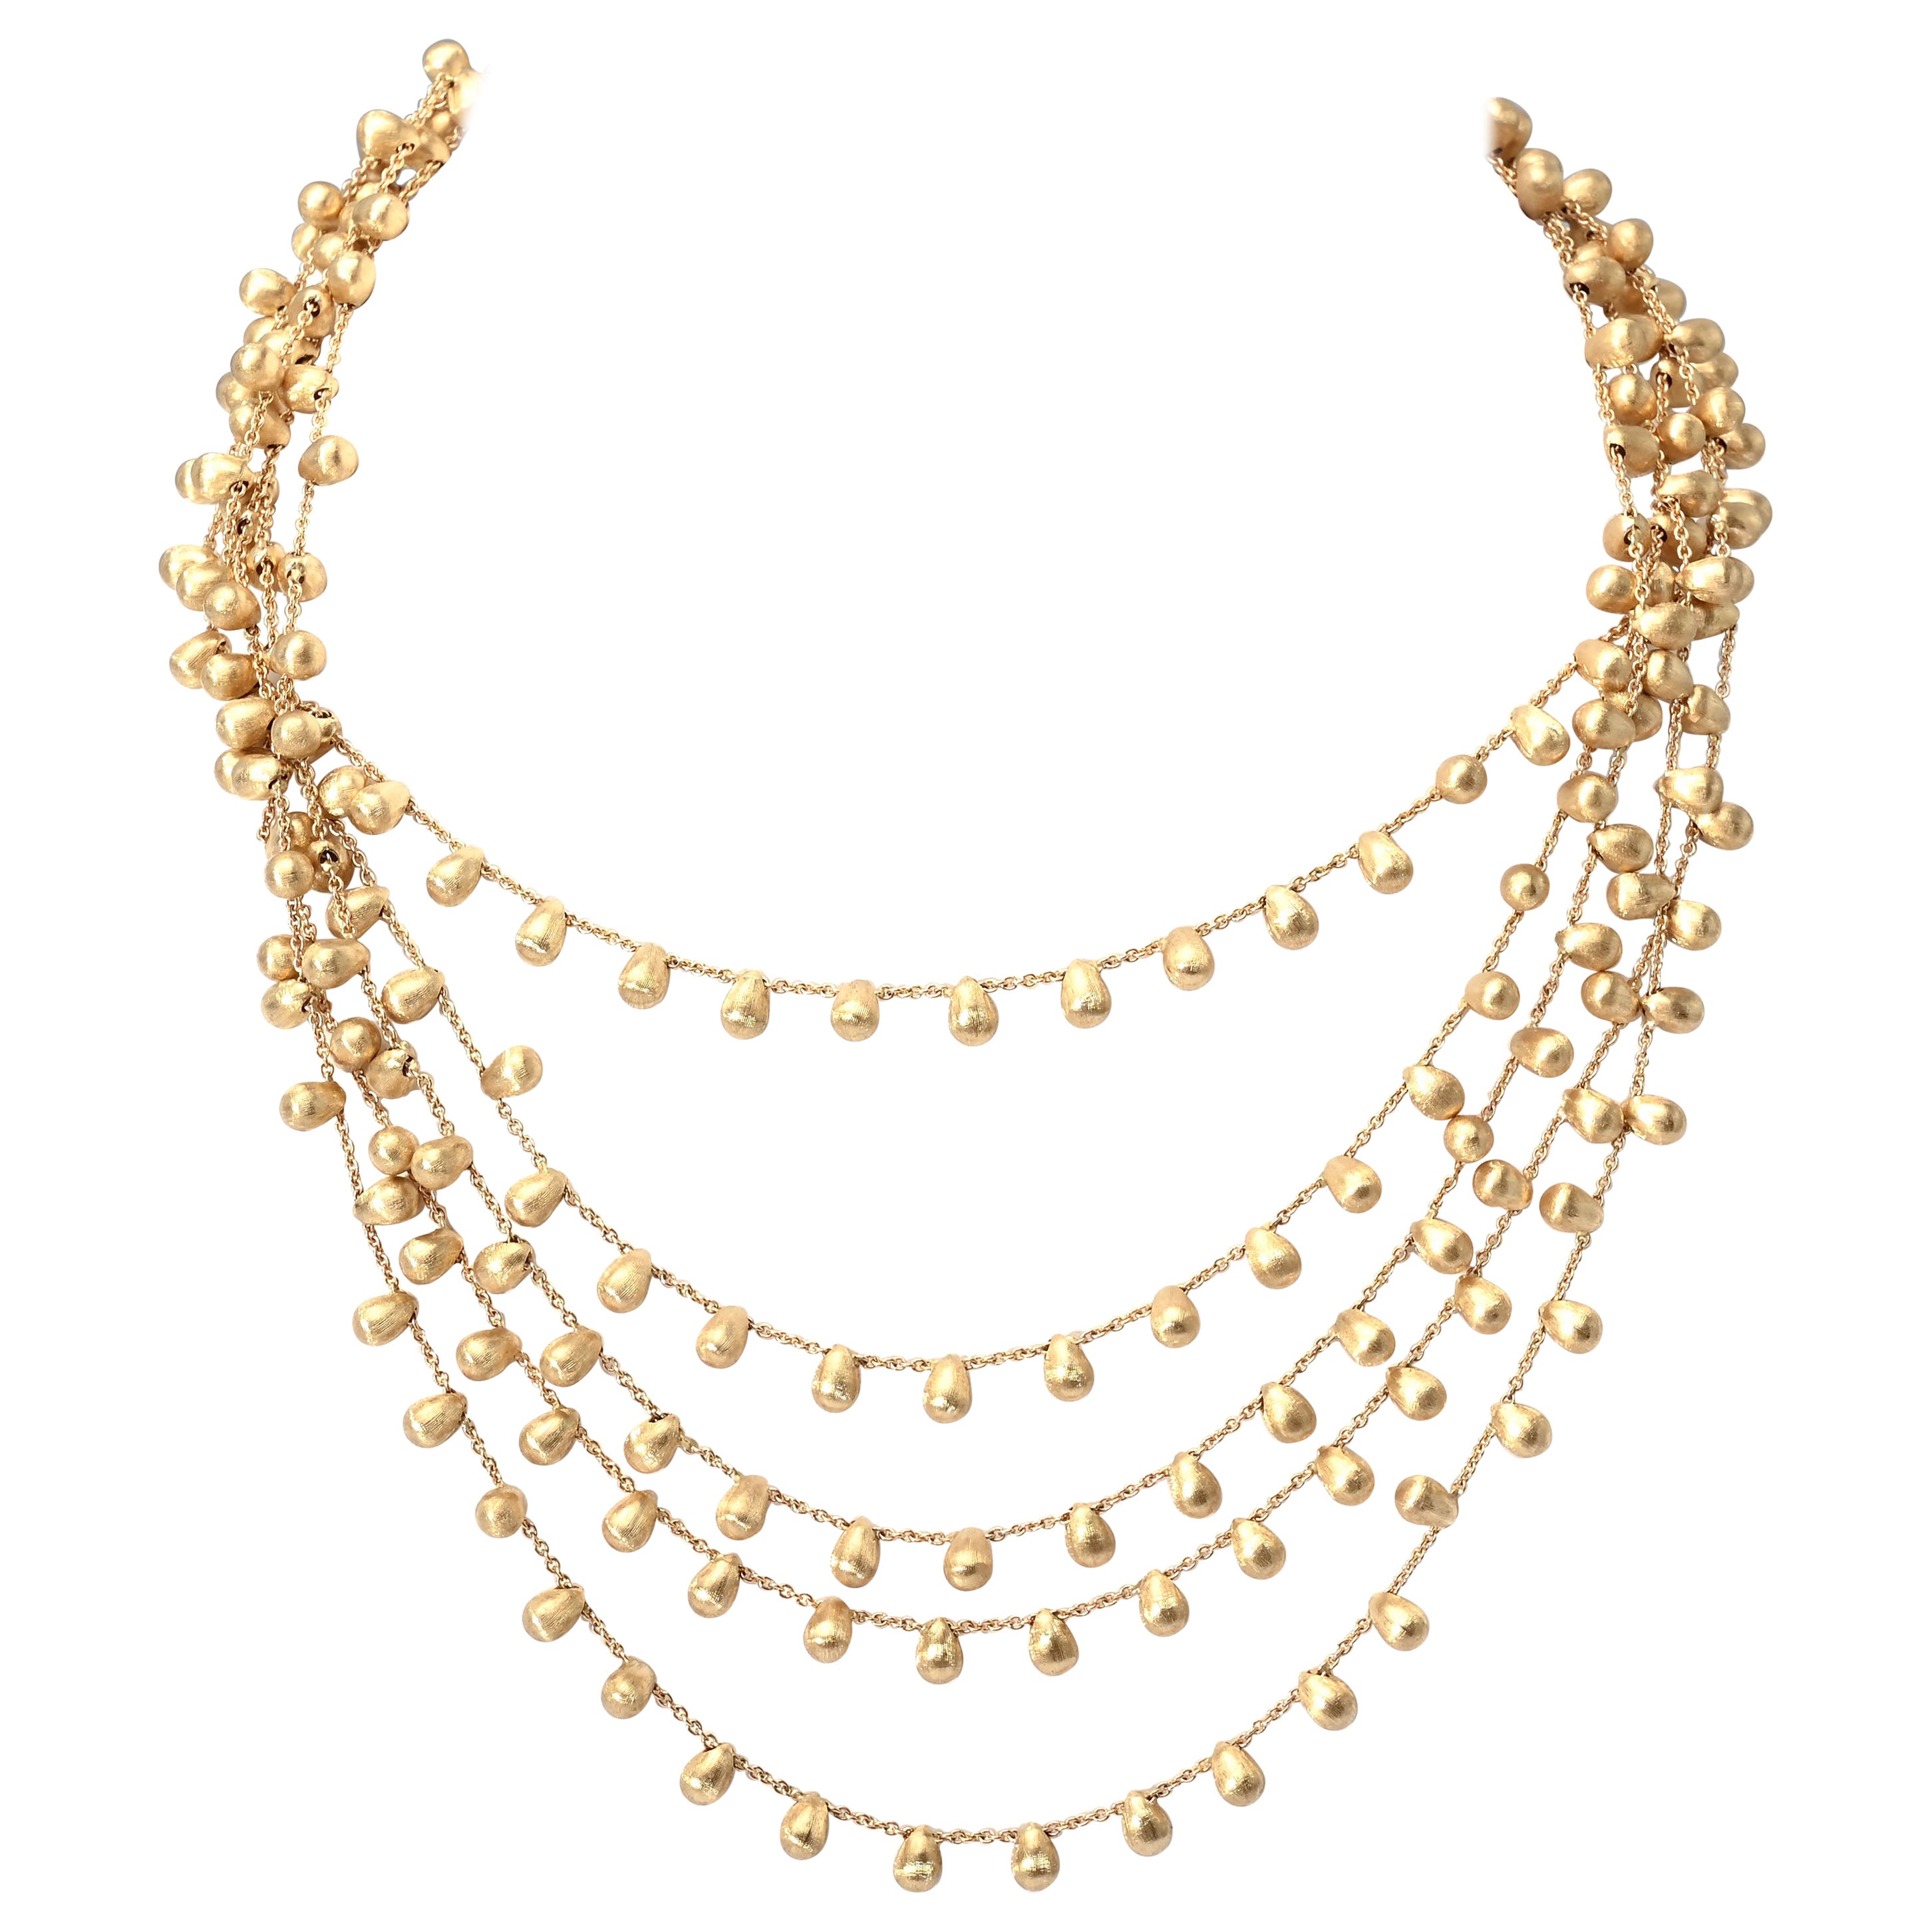 Marco Bicego Five Strand Gold Bead Necklace